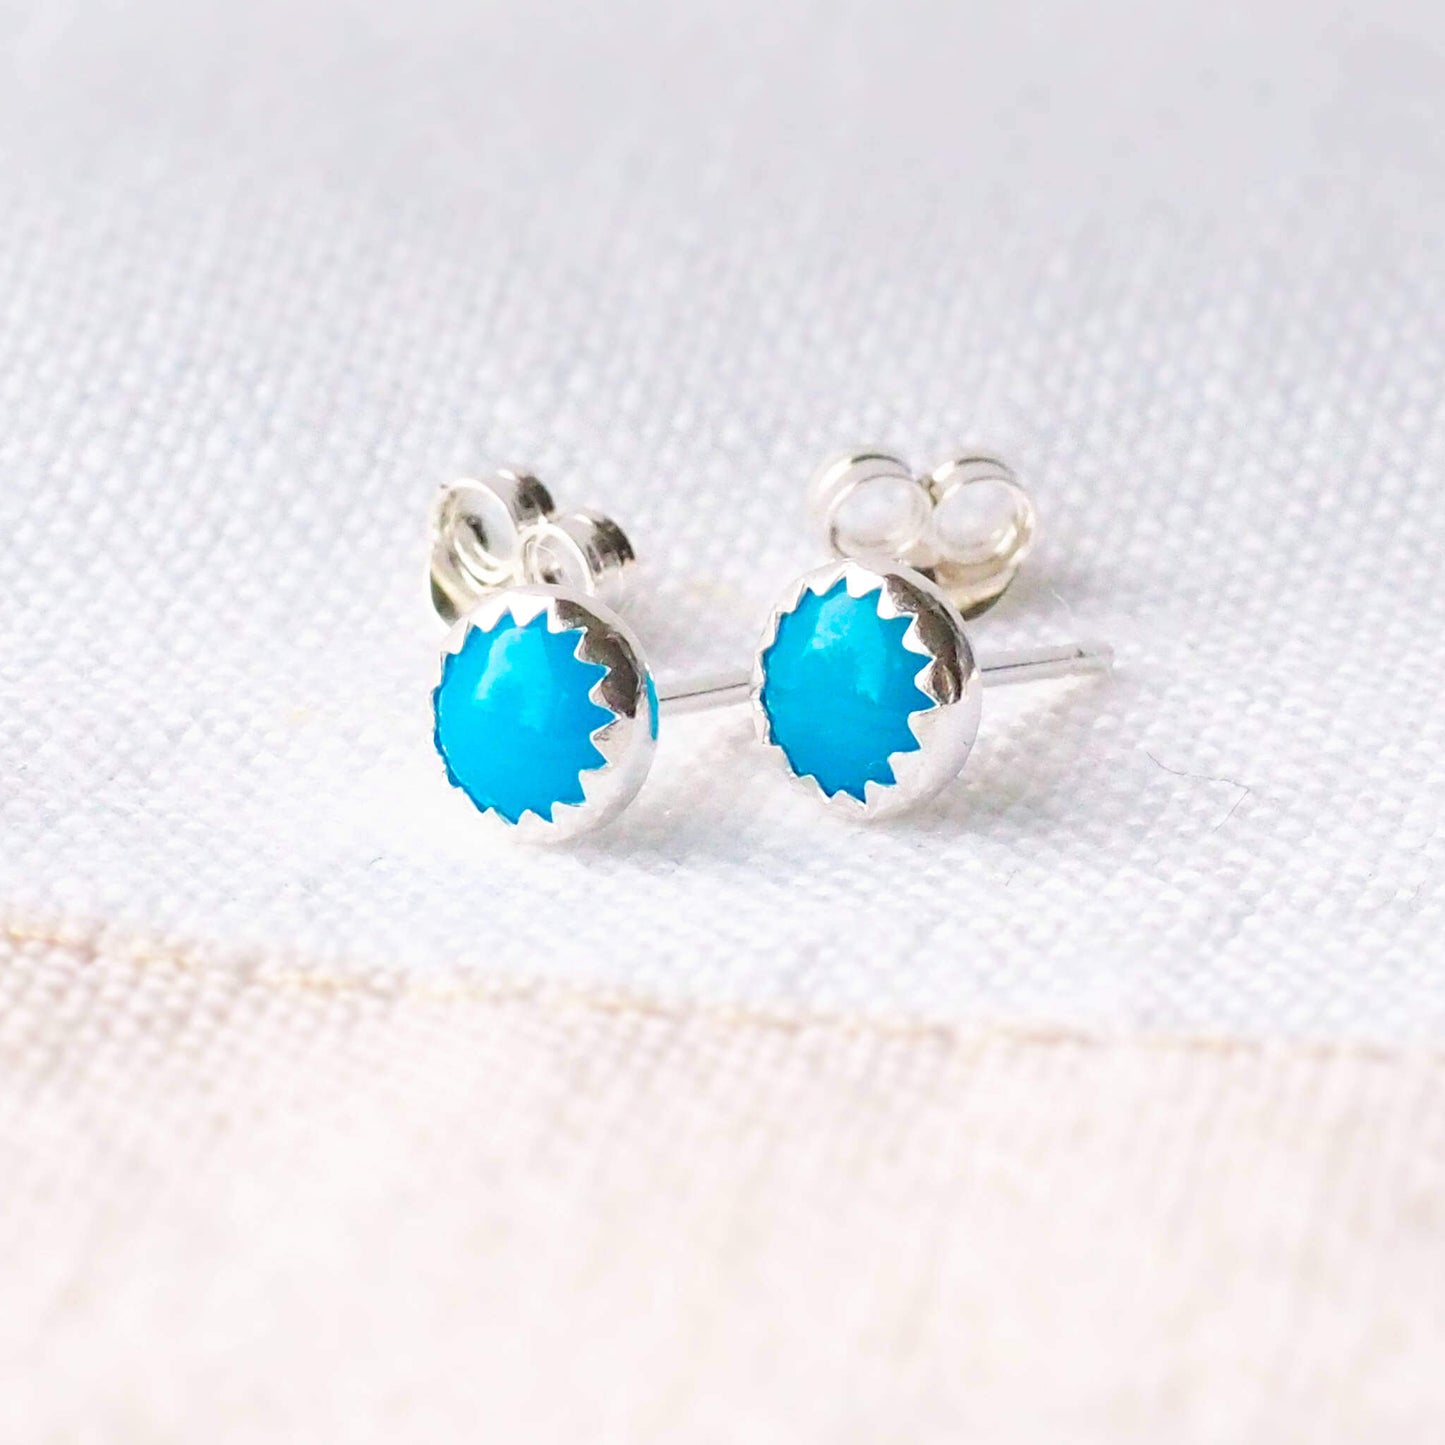 Beautifully simple modern gemstone stud earrings with a turquoise gemstone set by hand into a modern minimalist sterling silver surround, sitting with earring backs on a linen cloth.The earrings are 5mm in size, round and come with butterfly backs.Turquoise is the birthstone for December. These stud earrings are handcrafted by a small business in Scotland UK by designer jeweller Maram Jewellery